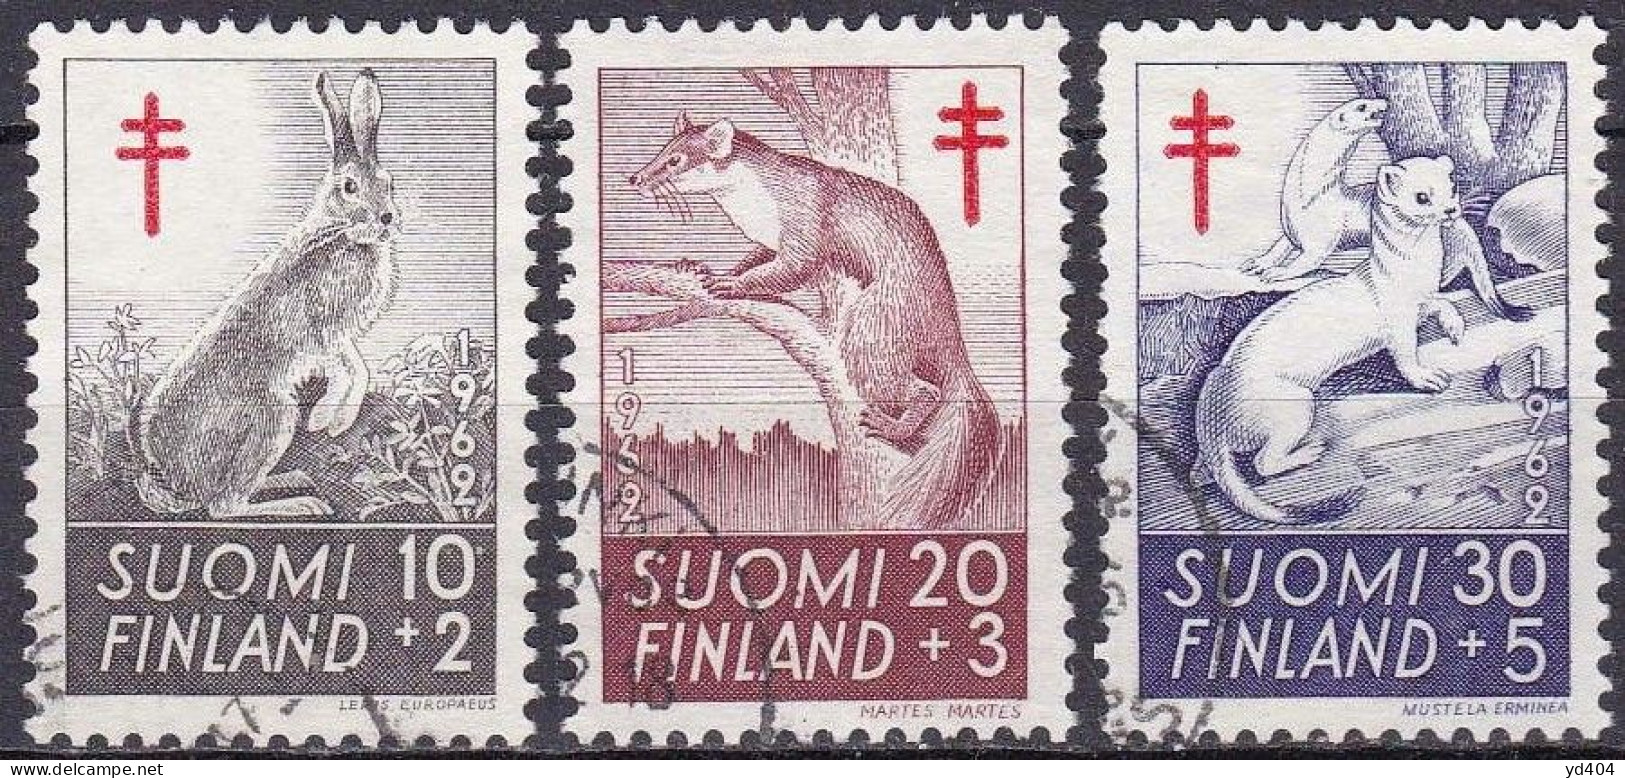 FI110 – FINLANDE – FINLAND – 1962 – ANTI-TUBERCULOSIS FUND – Y&T 527/29 USED - Used Stamps